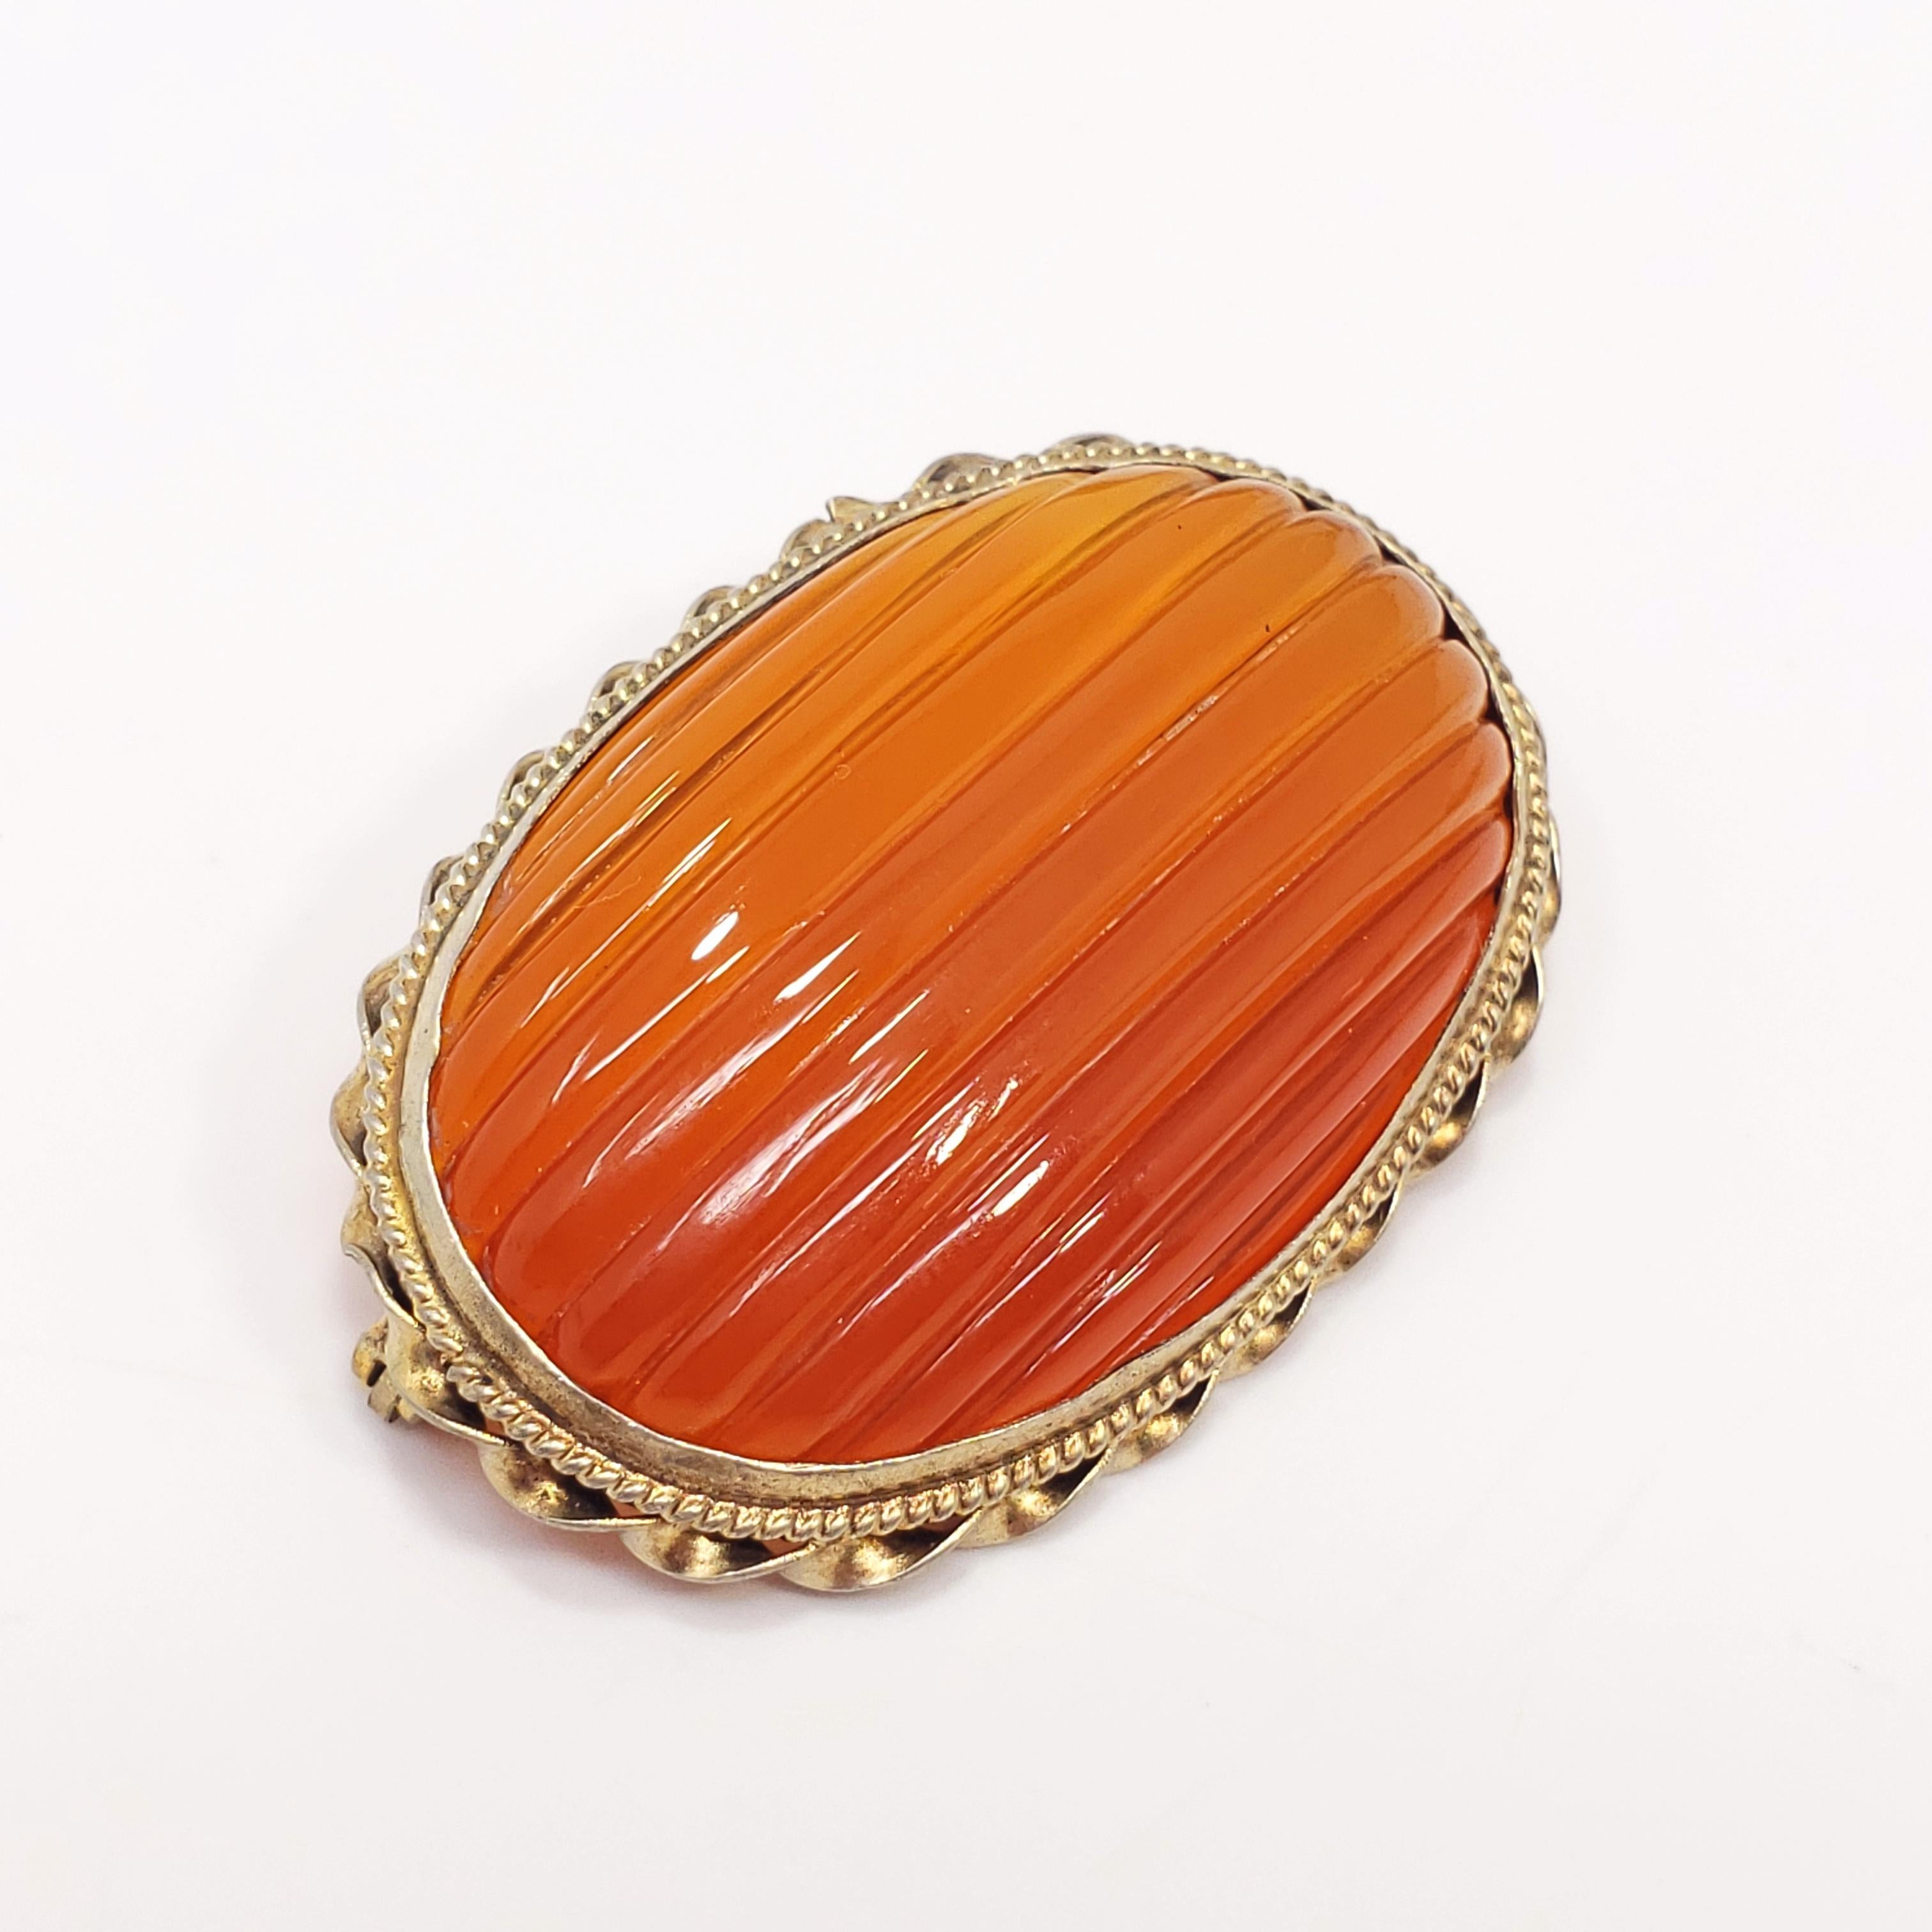 A carved carnelian gemstone in an ornate, Victorian, open-back, gilt brass, bezel setting. Antique spring ring clasp. The gemstone in this pin/brooch is beautifully carved and polished. A classic style!